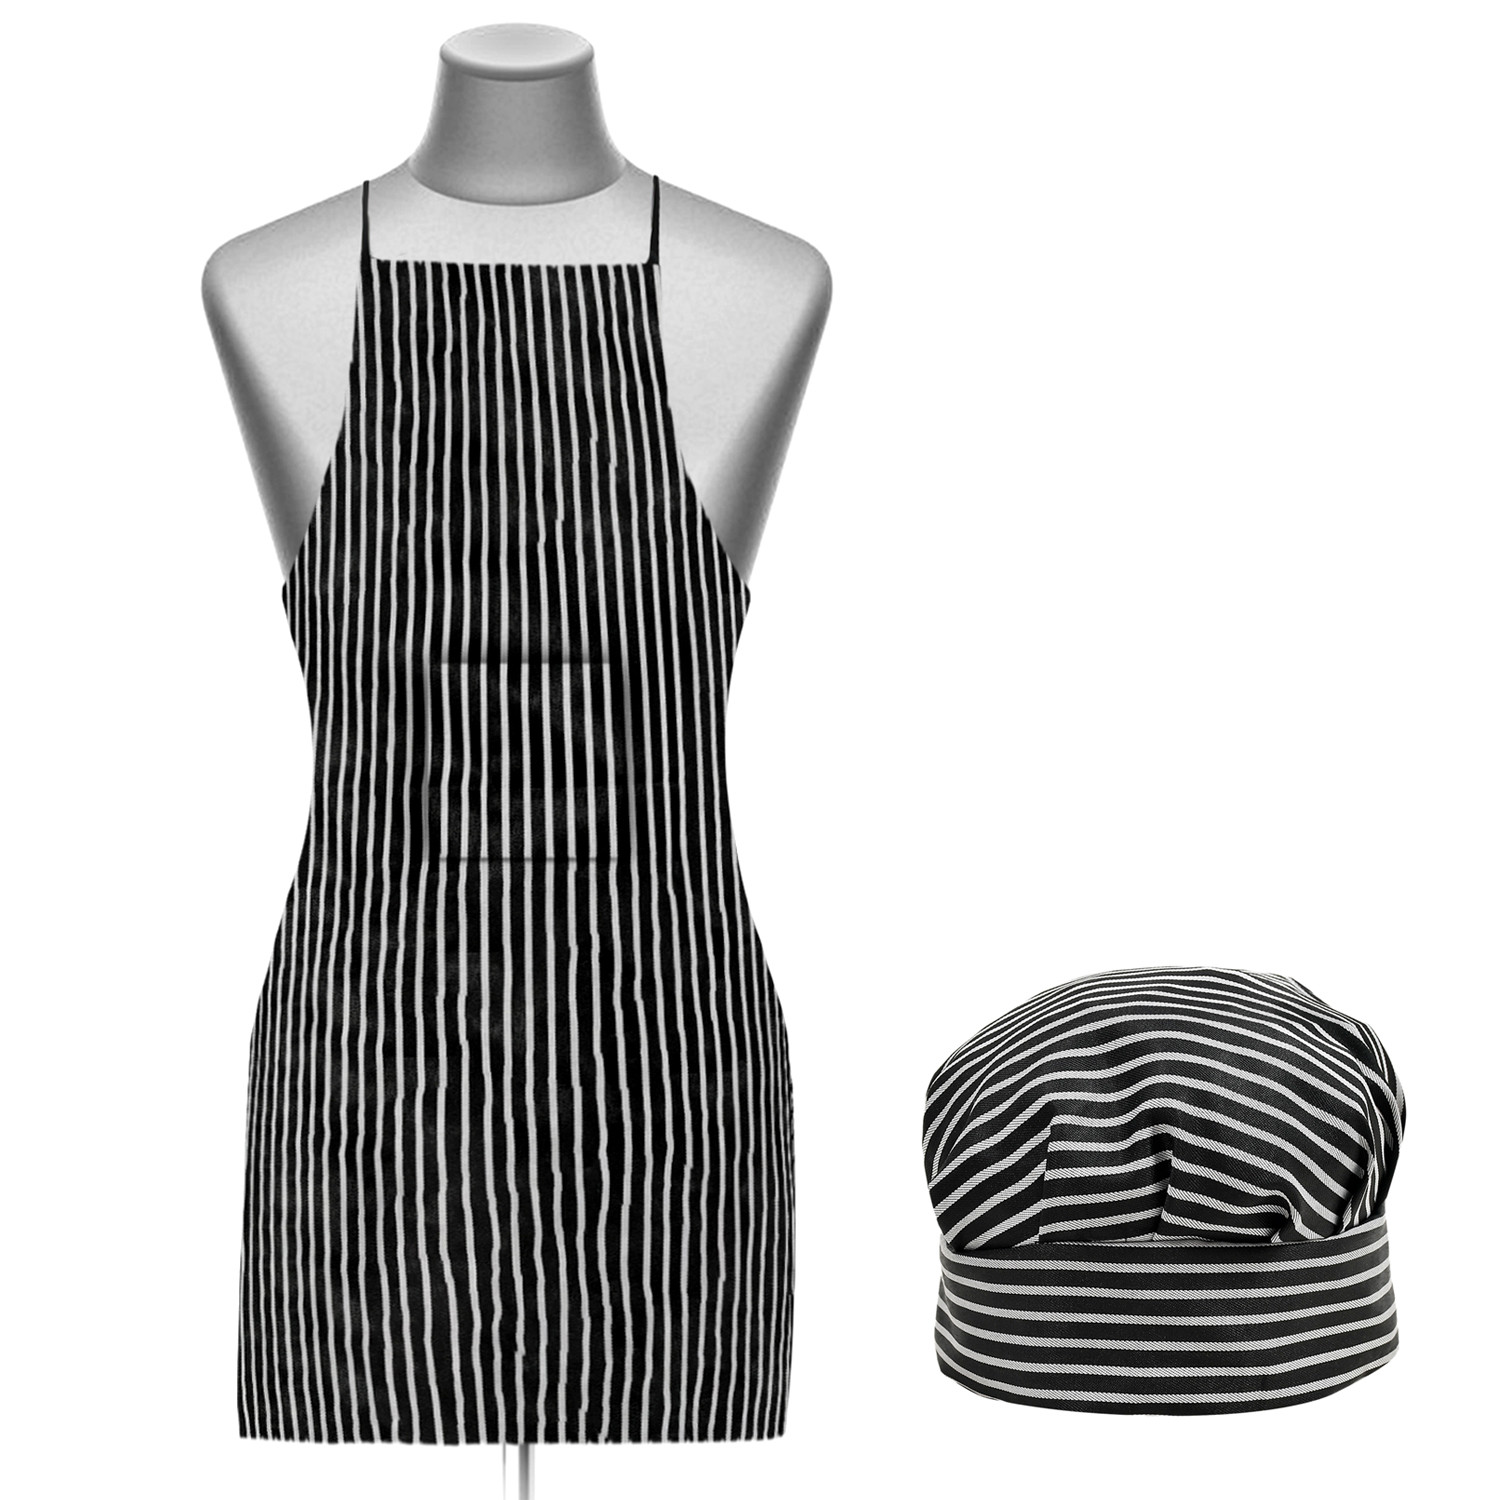 Kuber Industries Linning Printed Apron & Cooking Cap Set For Cooking, Baking, Party Favors, Home Kitchen, Restaurant,(Black & White)